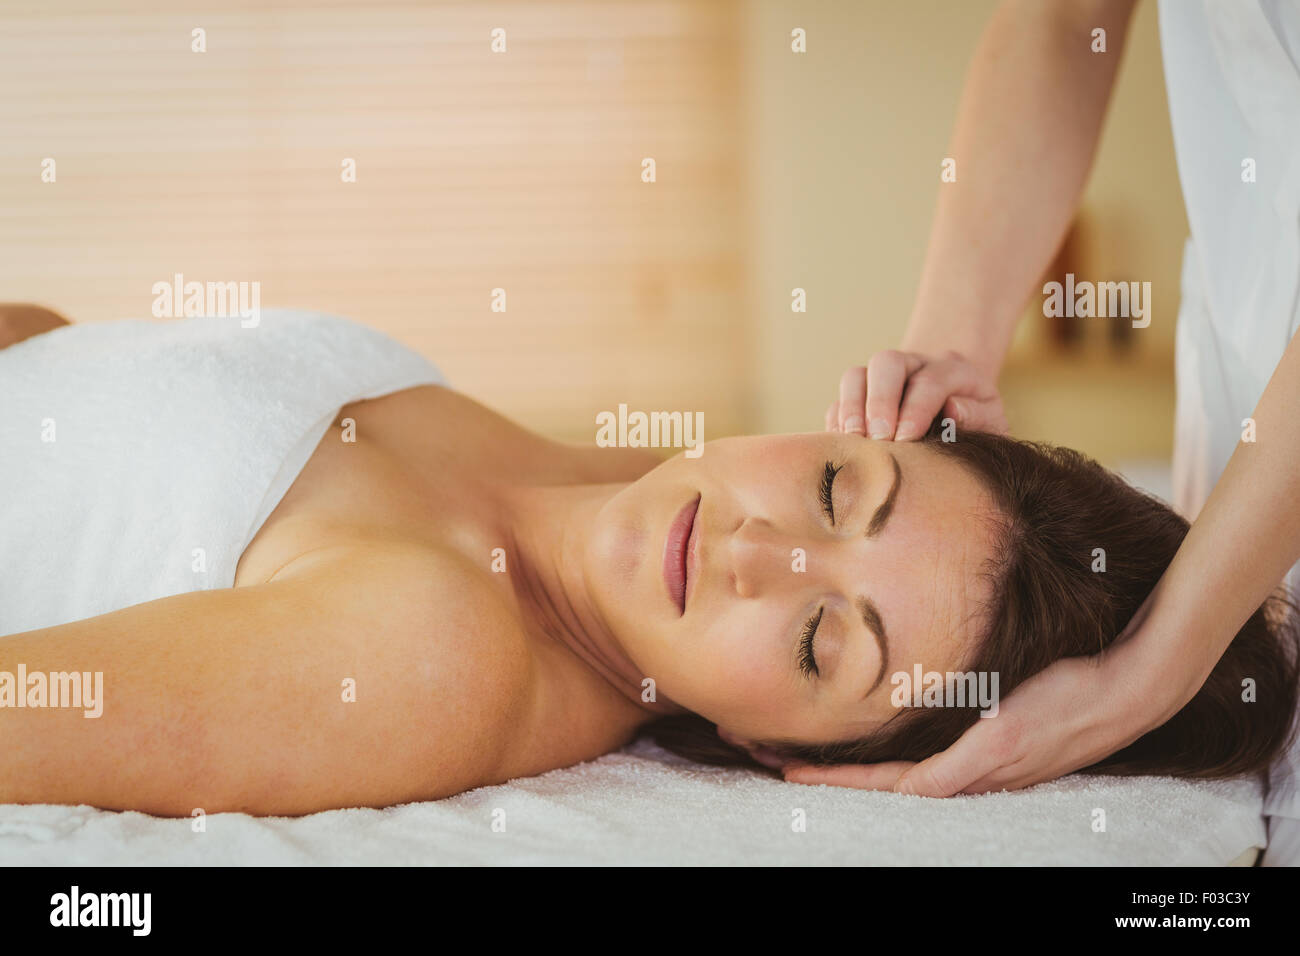 Young woman getting a massage Banque D'Images